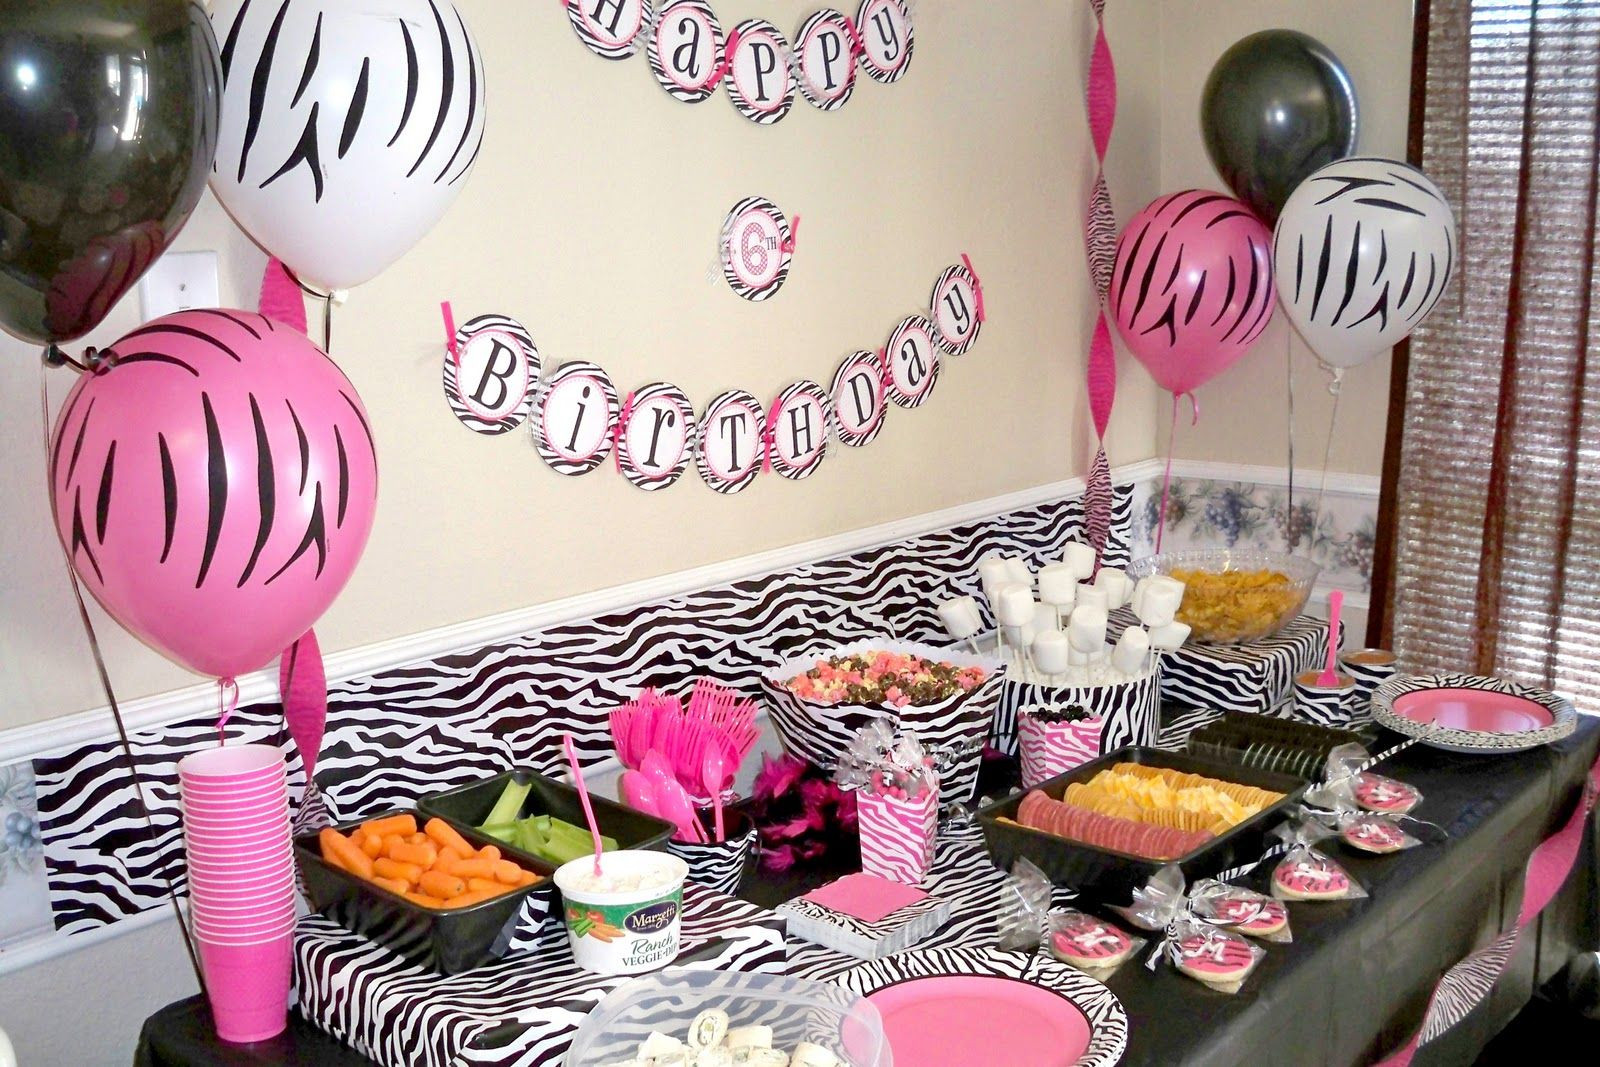 Zebra Print And Pink Birthday Party Ideas
 Zebra table decorations for an animal print party